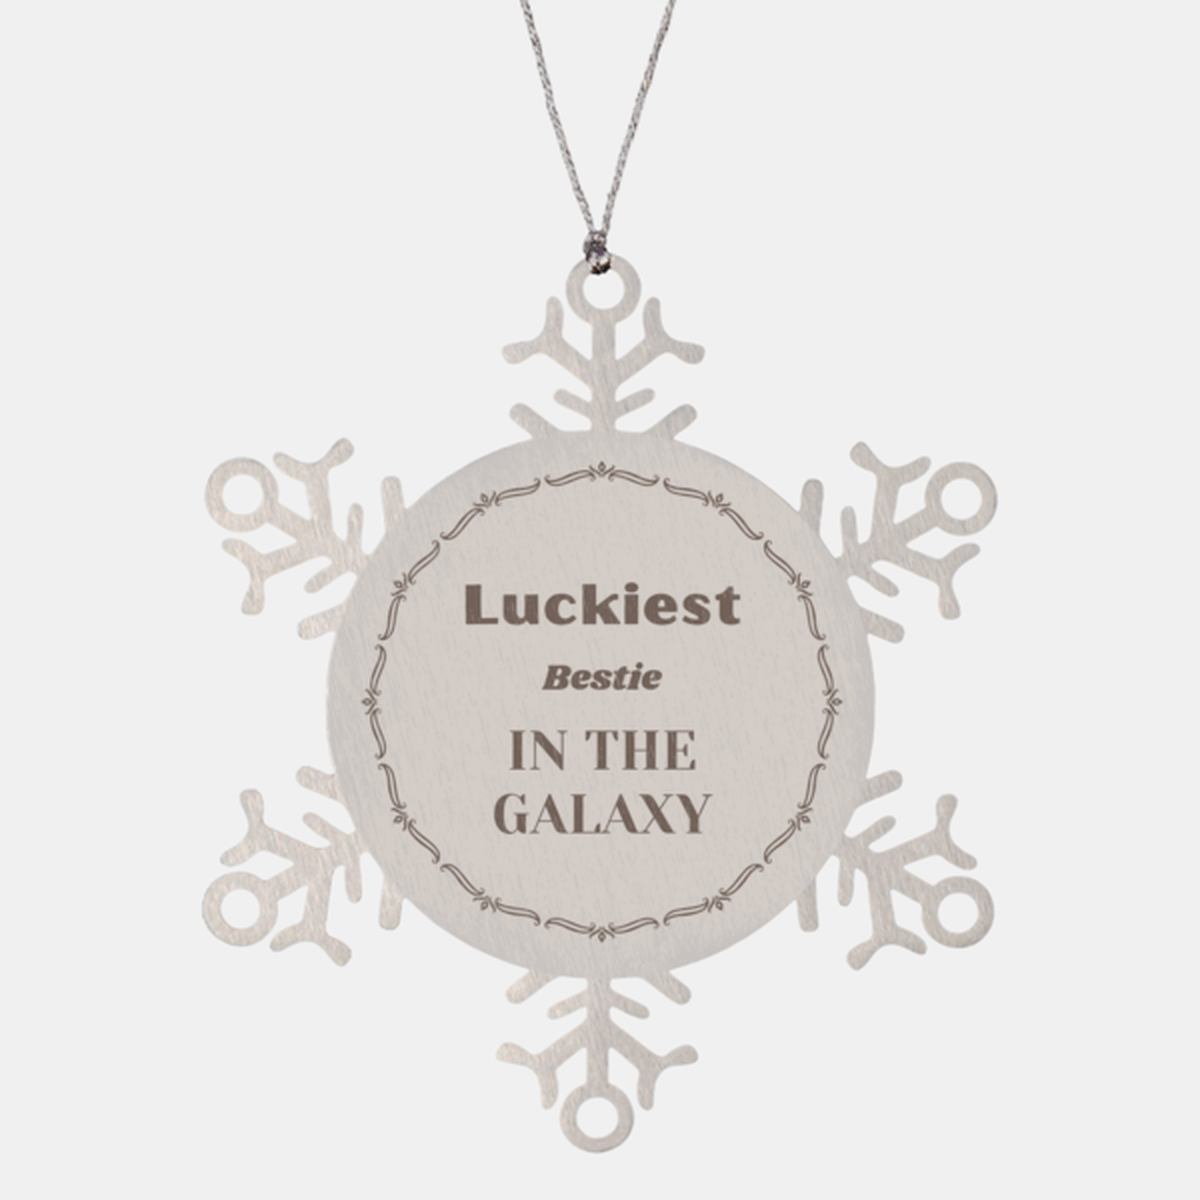 Luckiest Bestie in the Galaxy, To My Bestie Ornament Gifts, Christmas Bestie Snowflake Ornament Gifts, X-mas Decorations Unique Gifts For Bestie Men Women